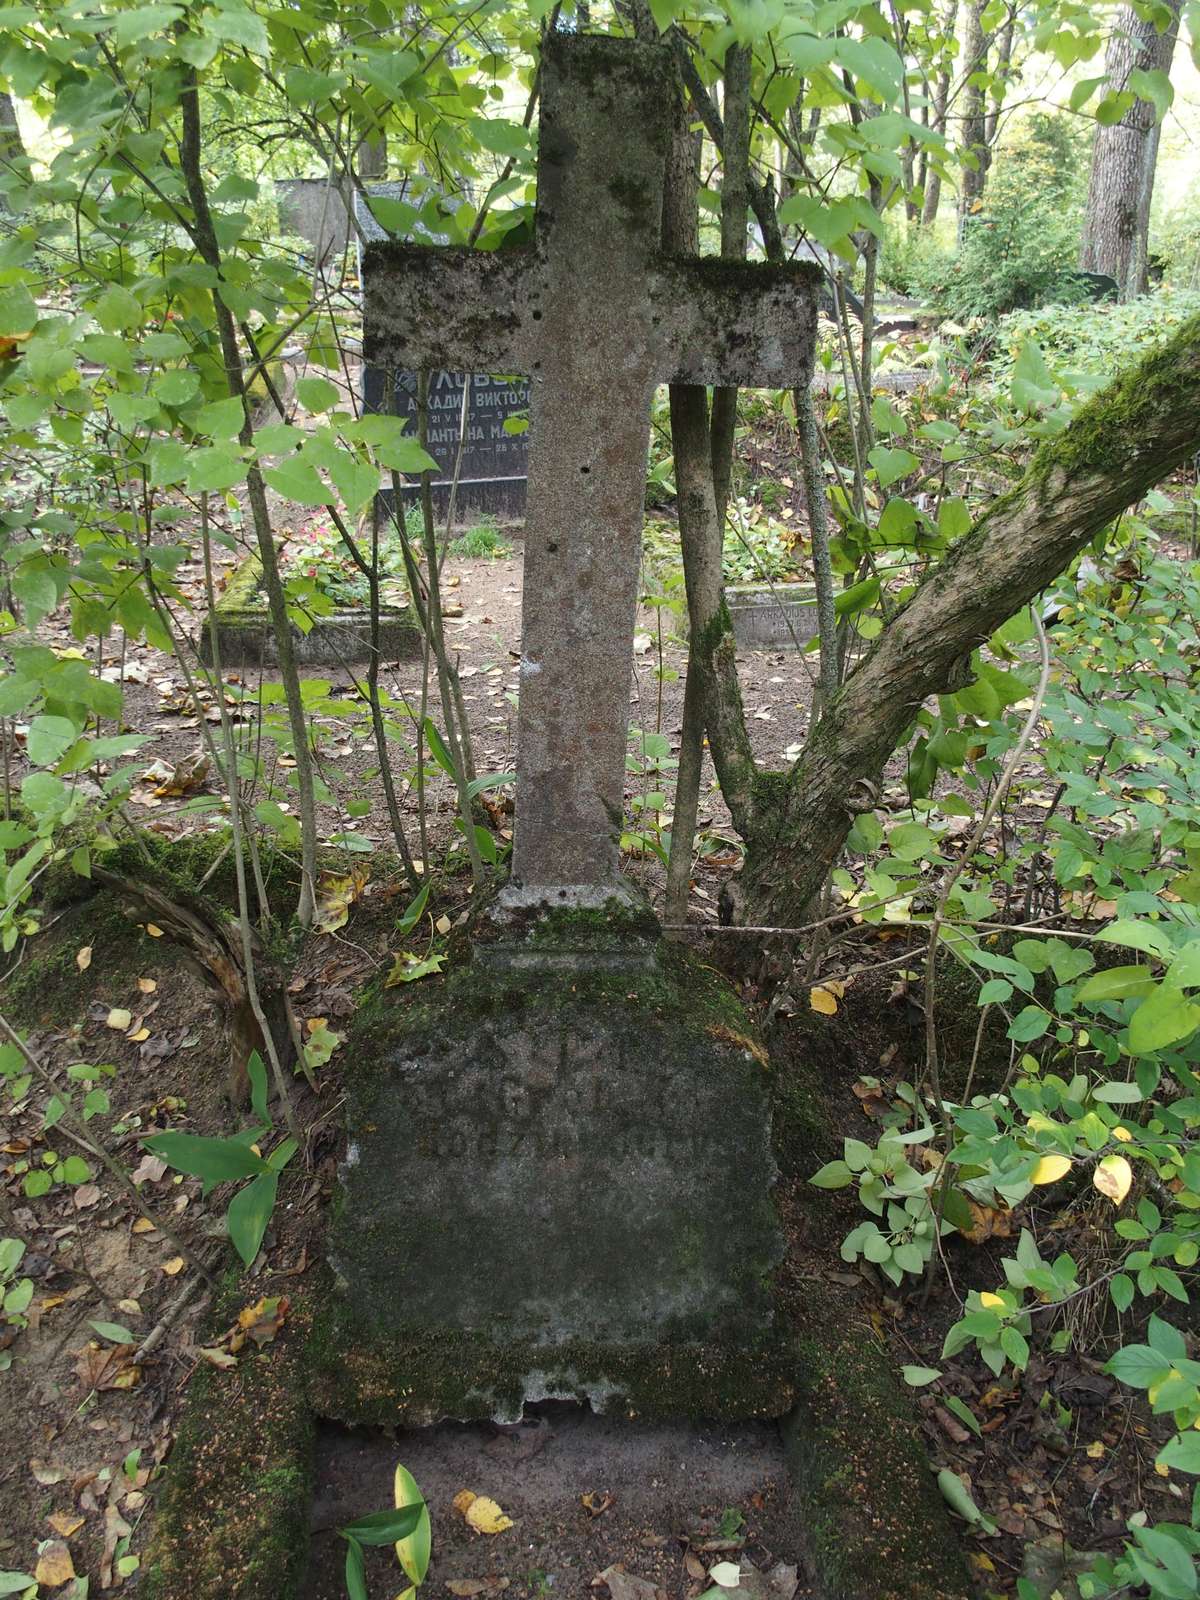 Tombstone of the Jurys family in St Michael's Cemetery, Riga (fragment)